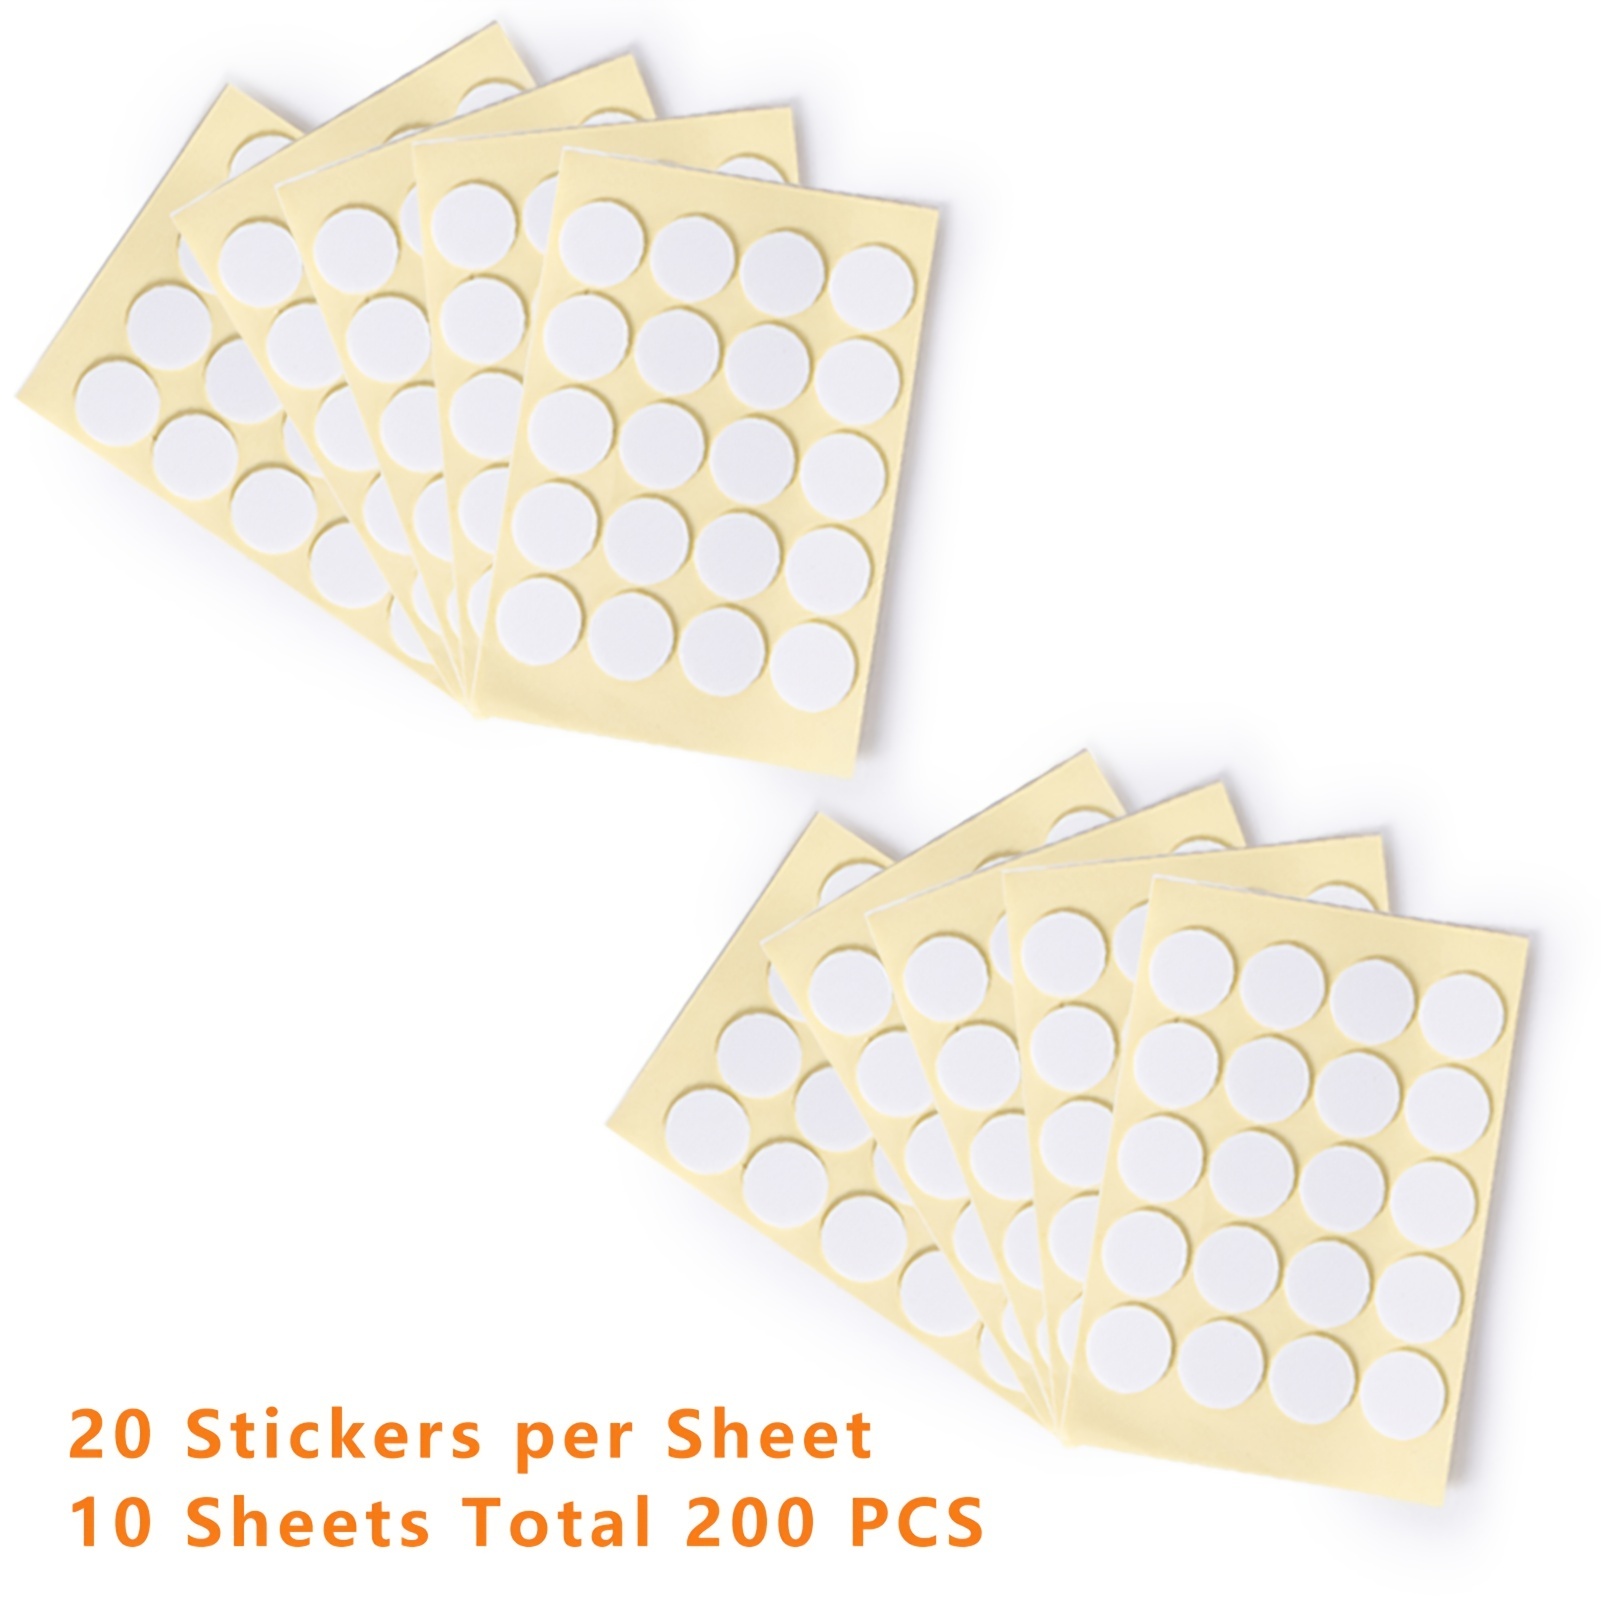 Hemoton Clear Double Sided Tape 120pcs Candle Wick Stickers, Heat Resistance Double- Sided Stickers, Adhere Steady in Hot Wax Stickers for Candle